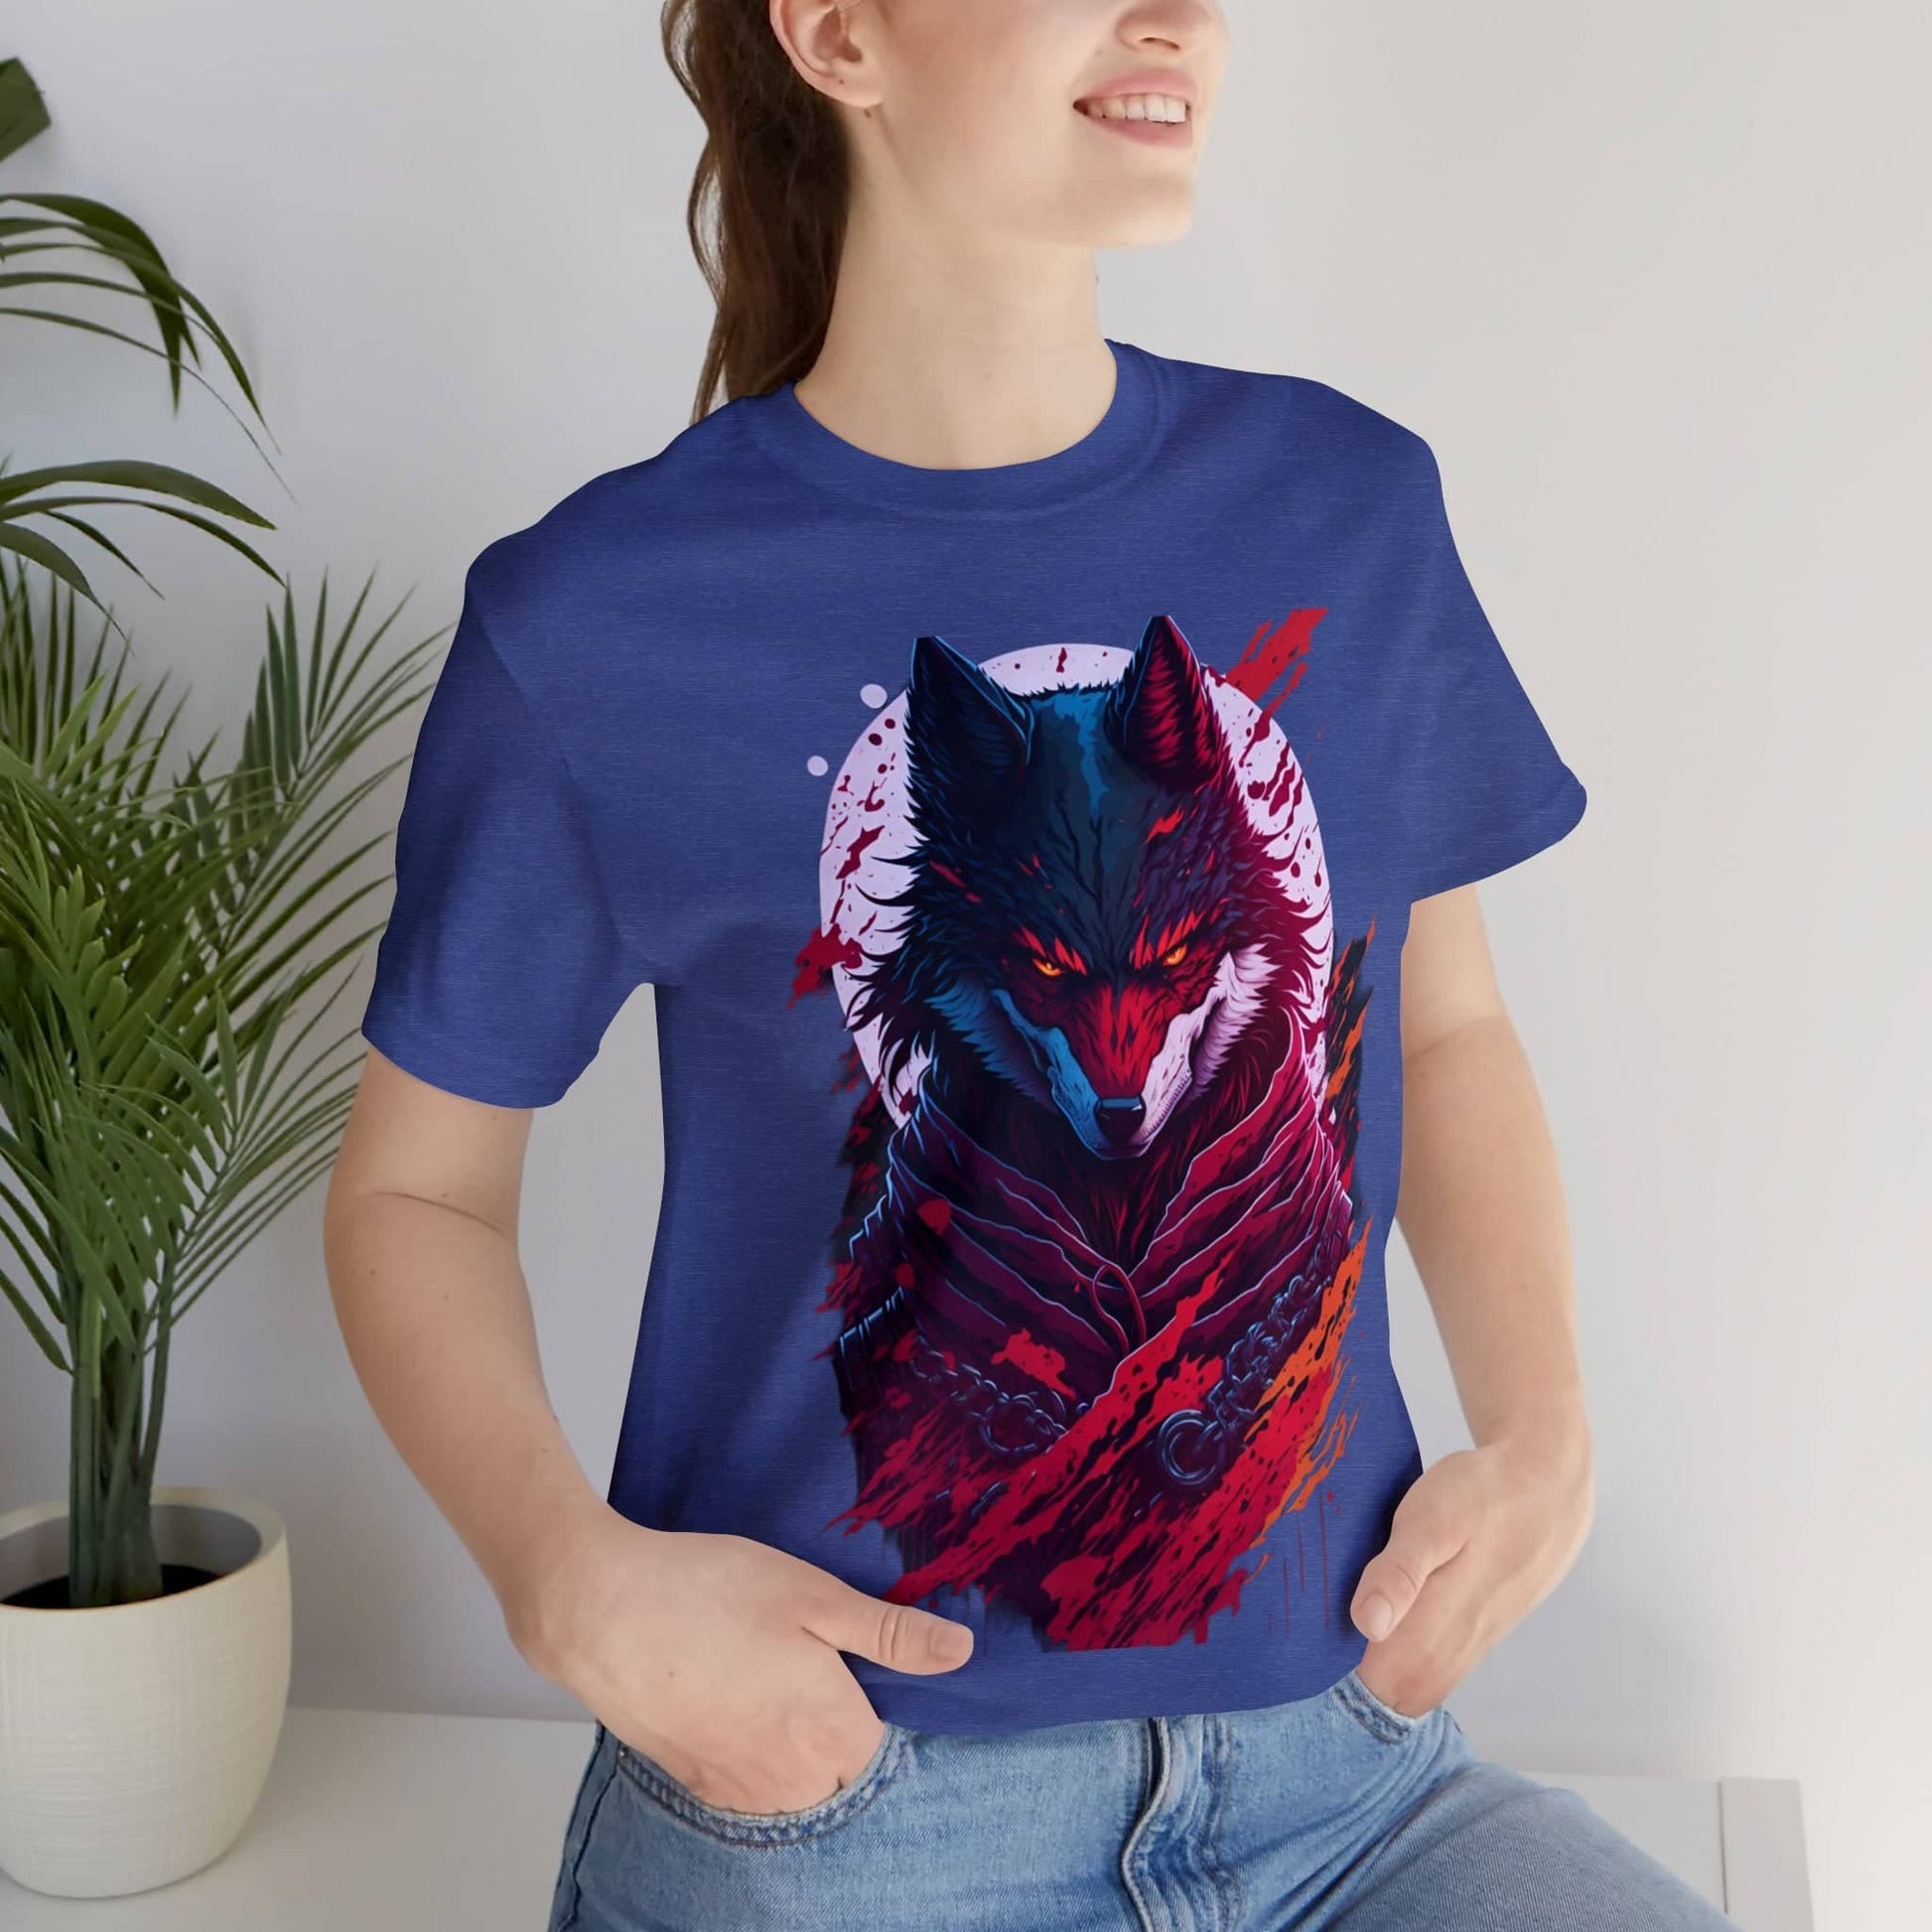 "Alex Hart: Unique T-Shirt Designs, American Design, Express Style Boldly, Fashion Trends, Personal Style, Exclusive Offers" T-Shirt Bigger Than Life   